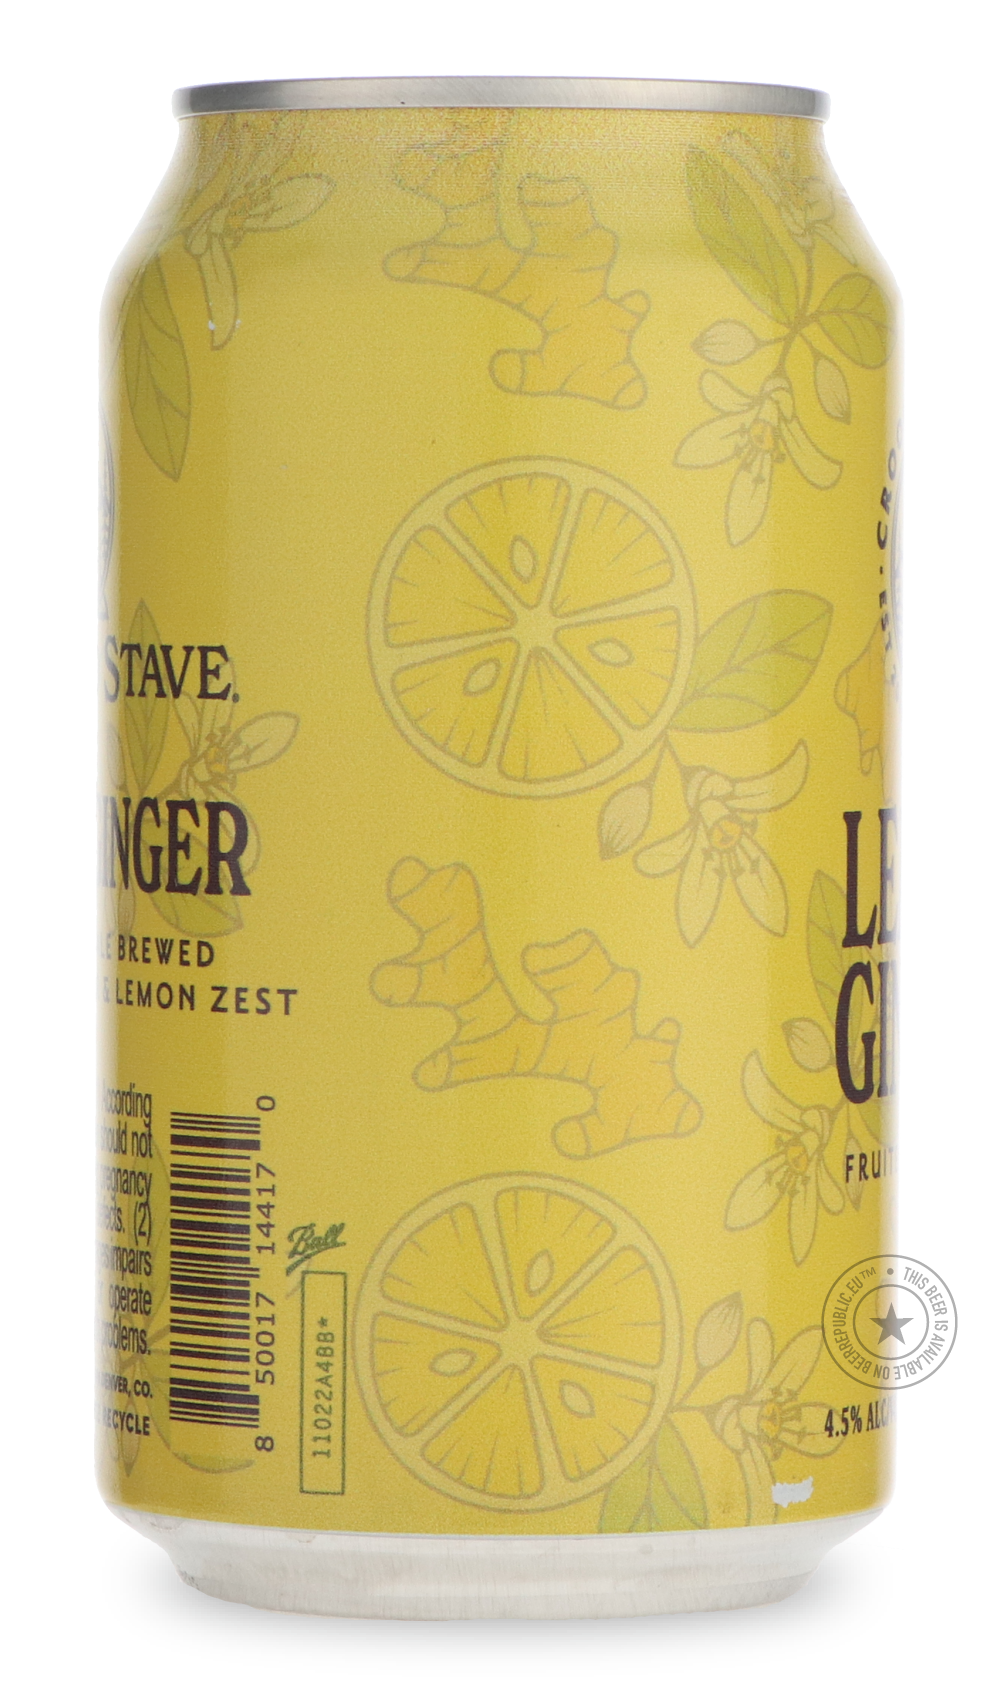 -Crooked Stave- Lemon Ginger-Sour / Wild & Fruity- Only @ Beer Republic - The best online beer store for American & Canadian craft beer - Buy beer online from the USA and Canada - Bier online kopen - Amerikaans bier kopen - Craft beer store - Craft beer kopen - Amerikanisch bier kaufen - Bier online kaufen - Acheter biere online - IPA - Stout - Porter - New England IPA - Hazy IPA - Imperial Stout - Barrel Aged - Barrel Aged Imperial Stout - Brown - Dark beer - Blond - Blonde - Pilsner - Lager - Wheat - Weiz